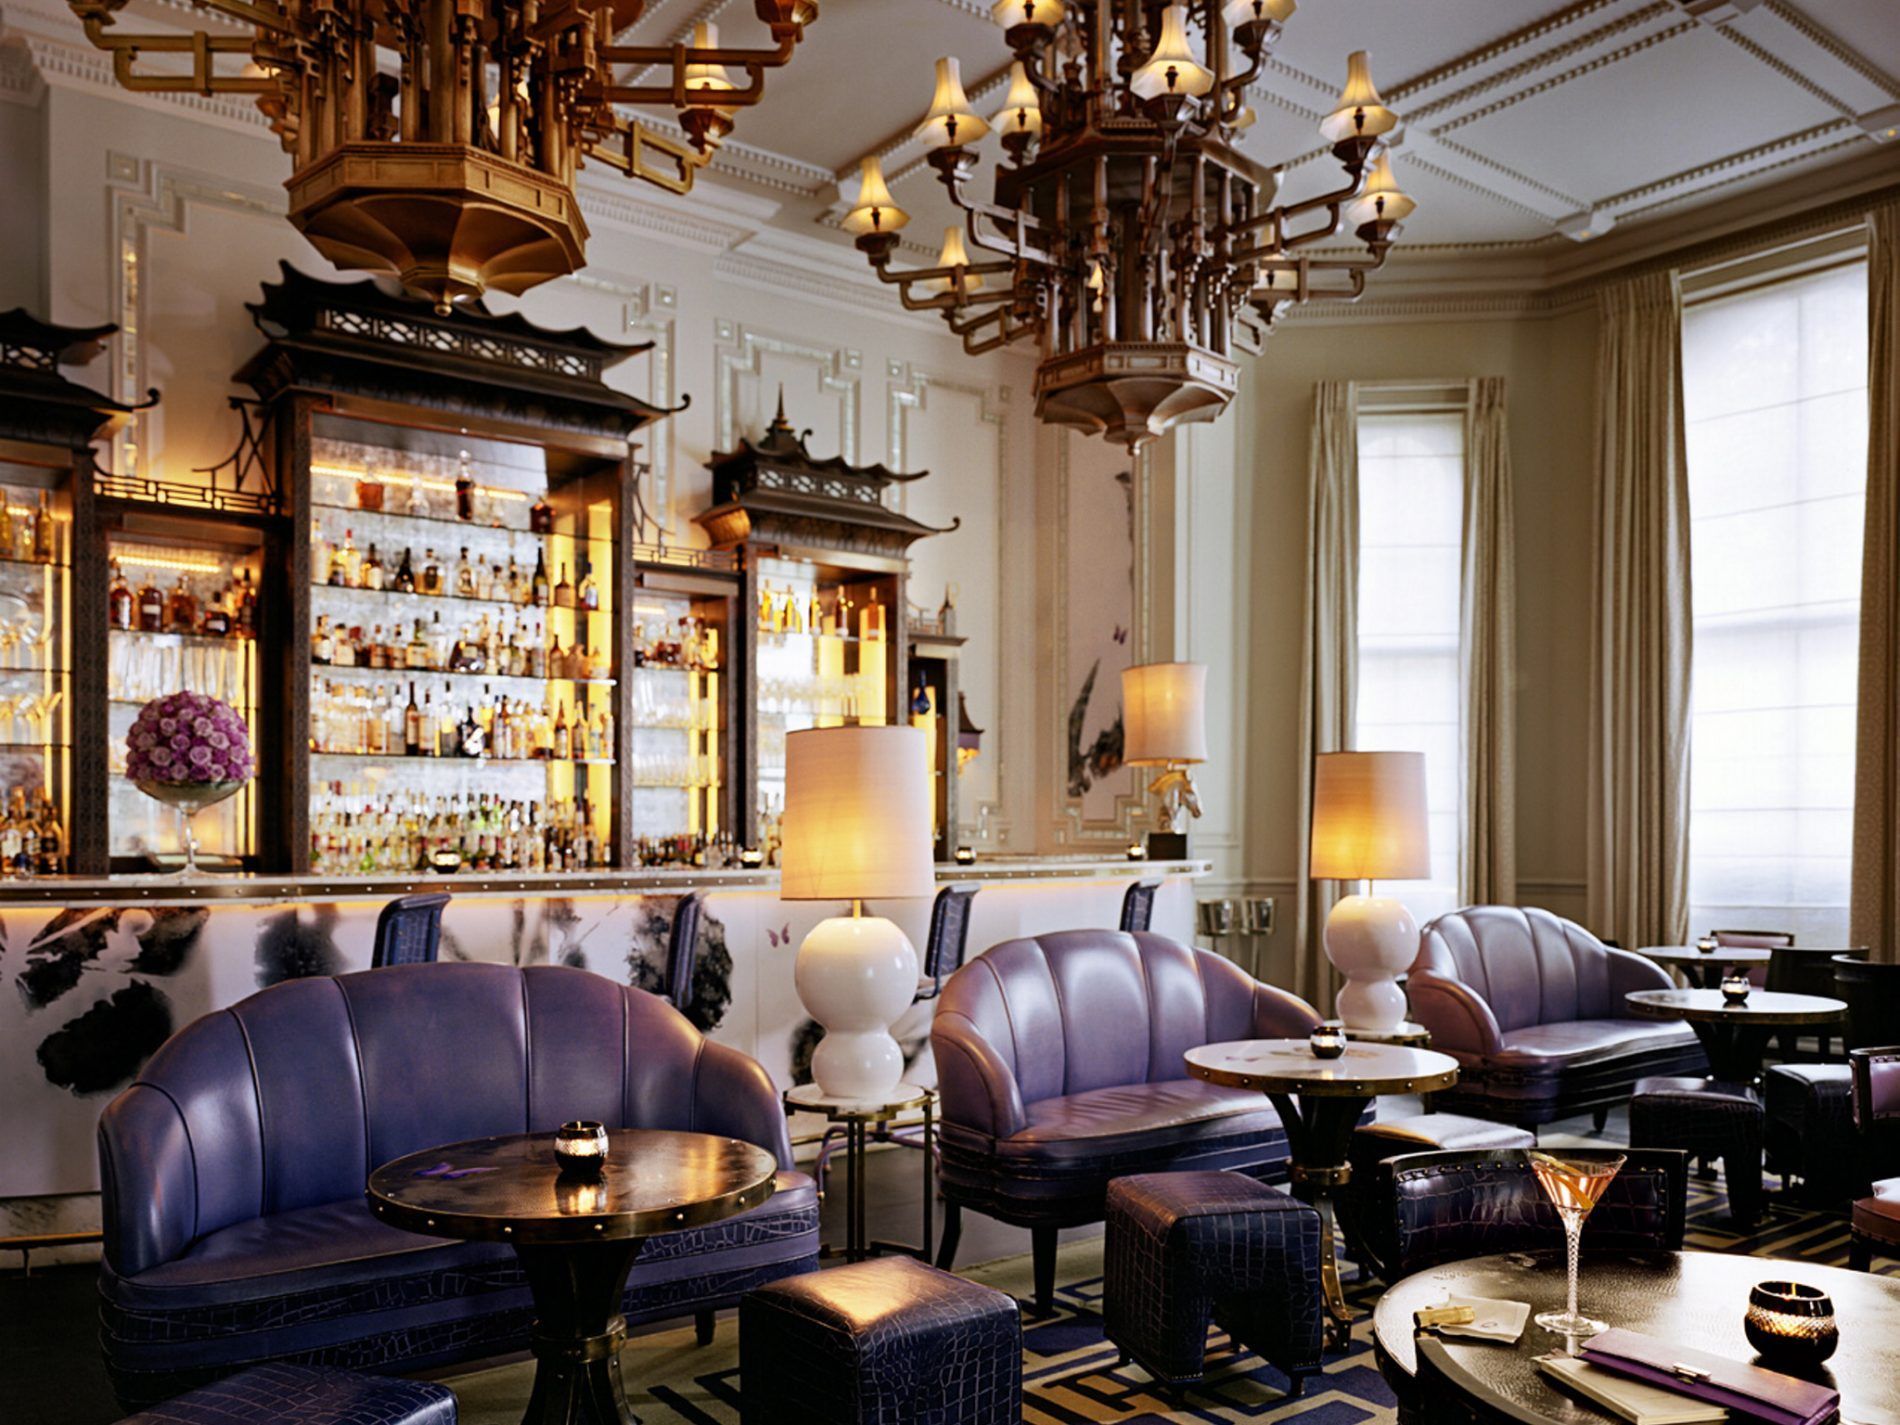 The 10 Most Expensive Bars In London | TheRichest